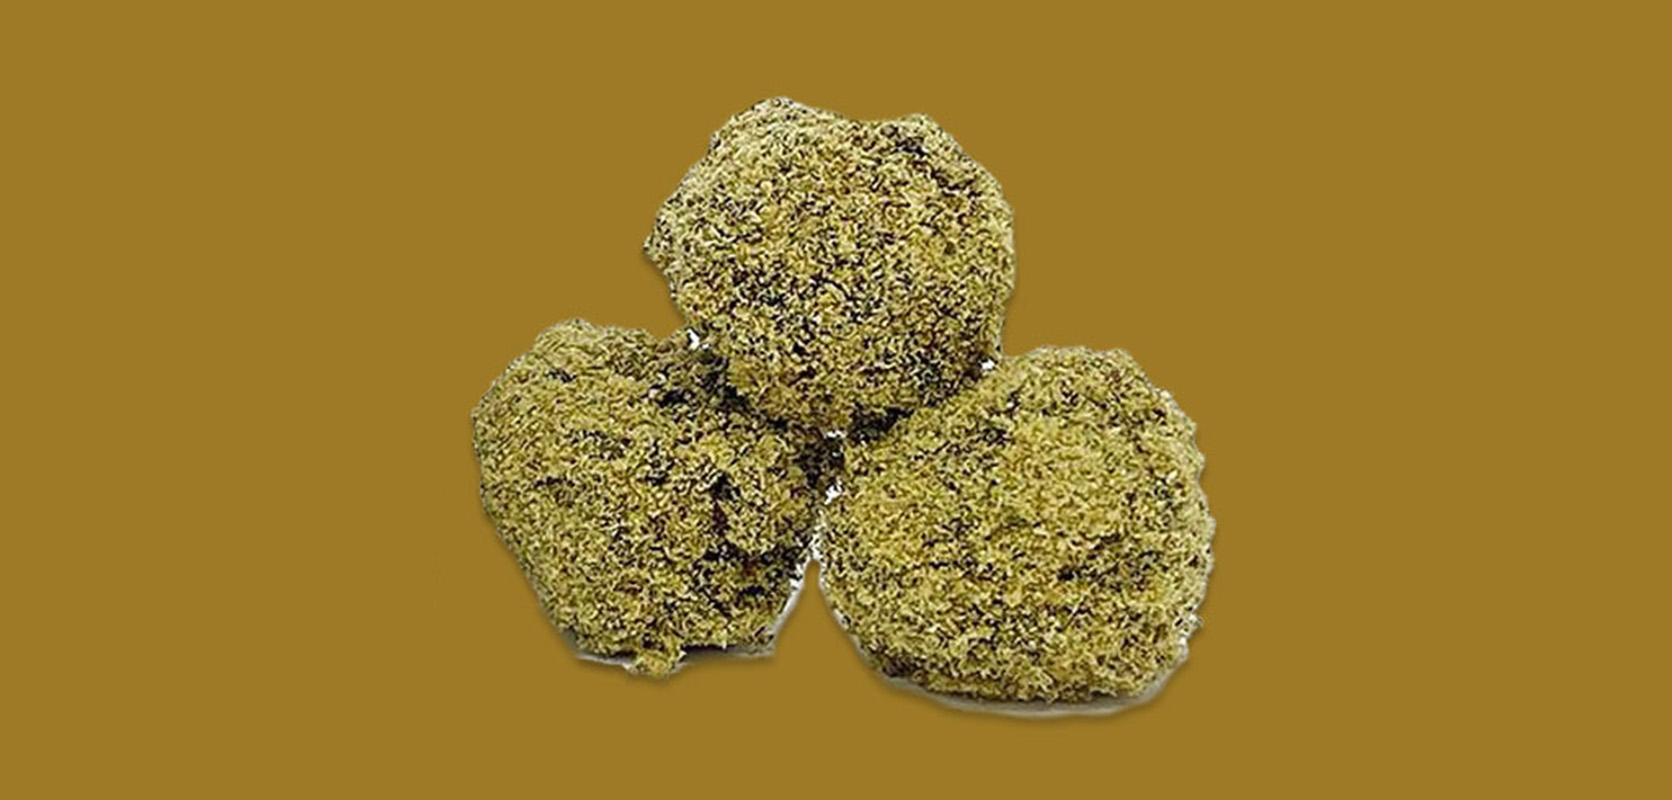 image of moon rock strain for sale online dispensary cannabis canada.